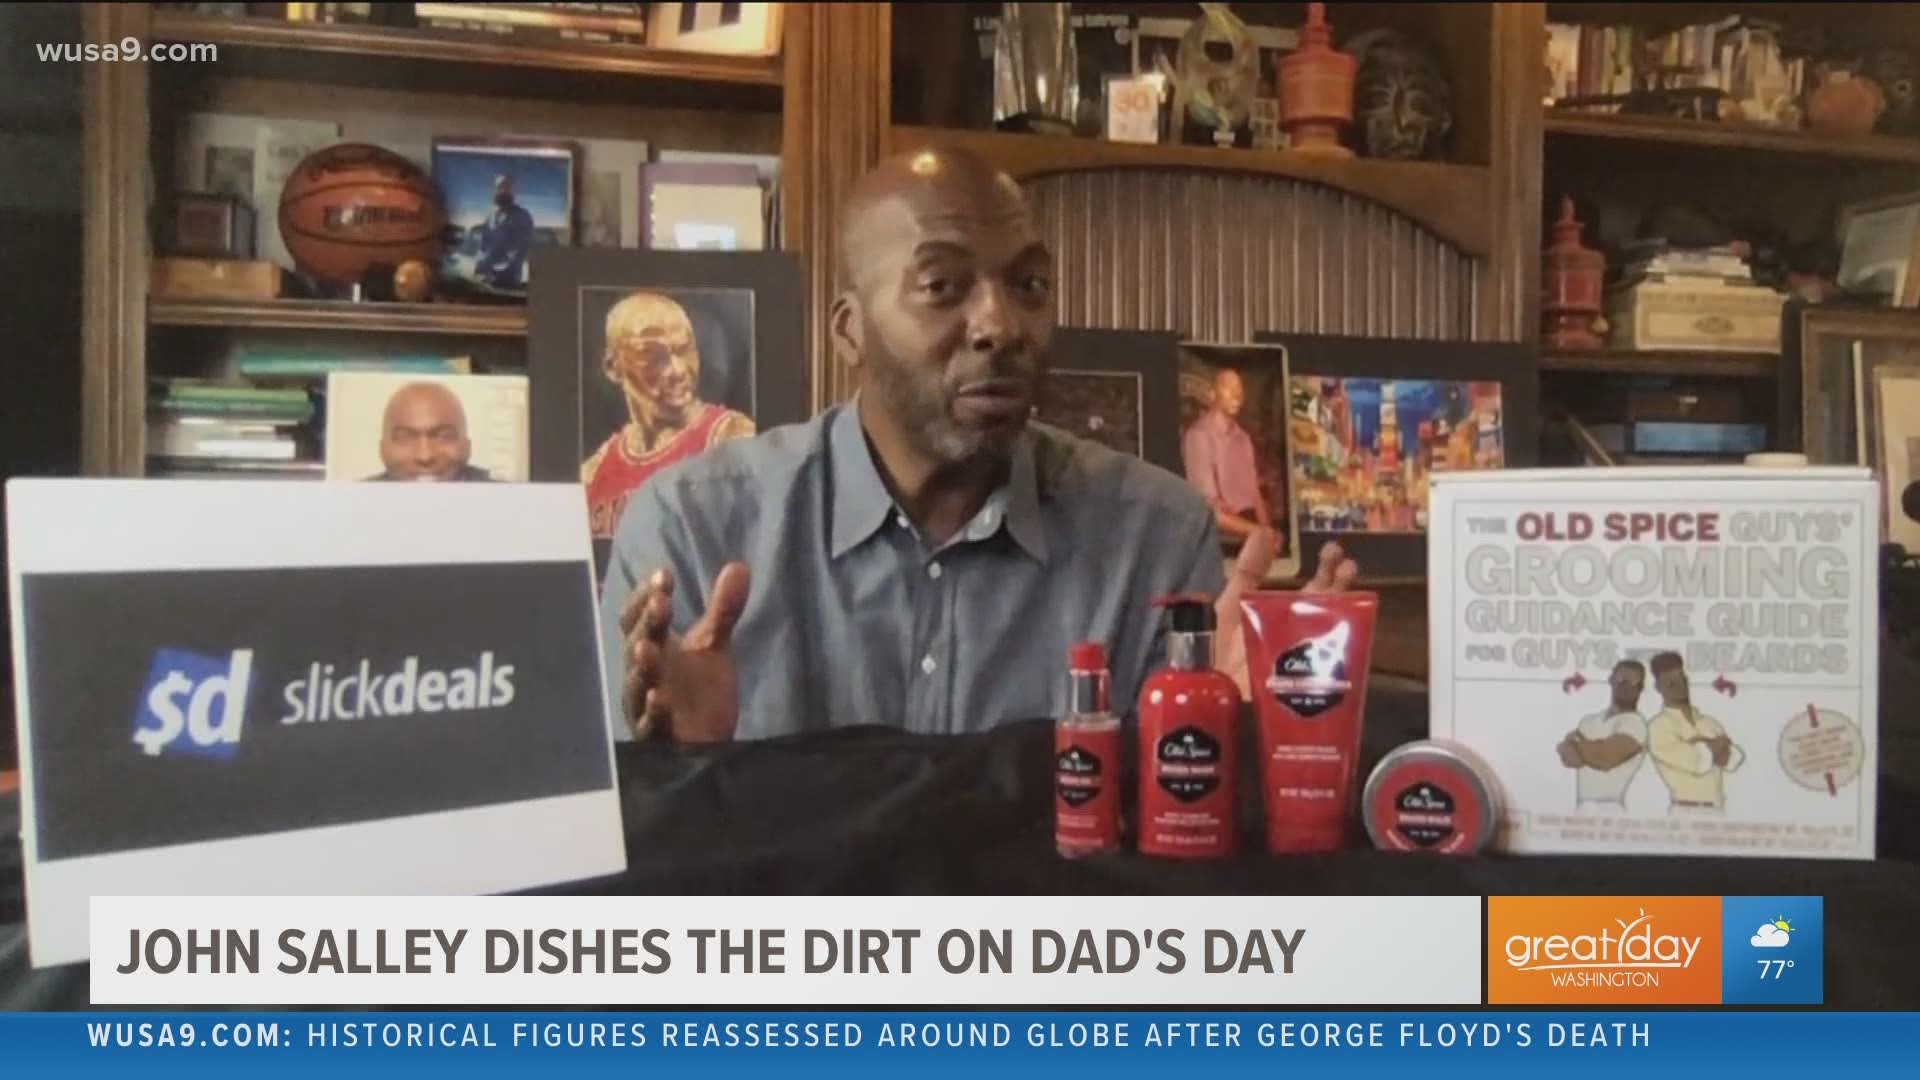 4 time NBA champion John Salley shares his ideas for great Father's Day gifts.